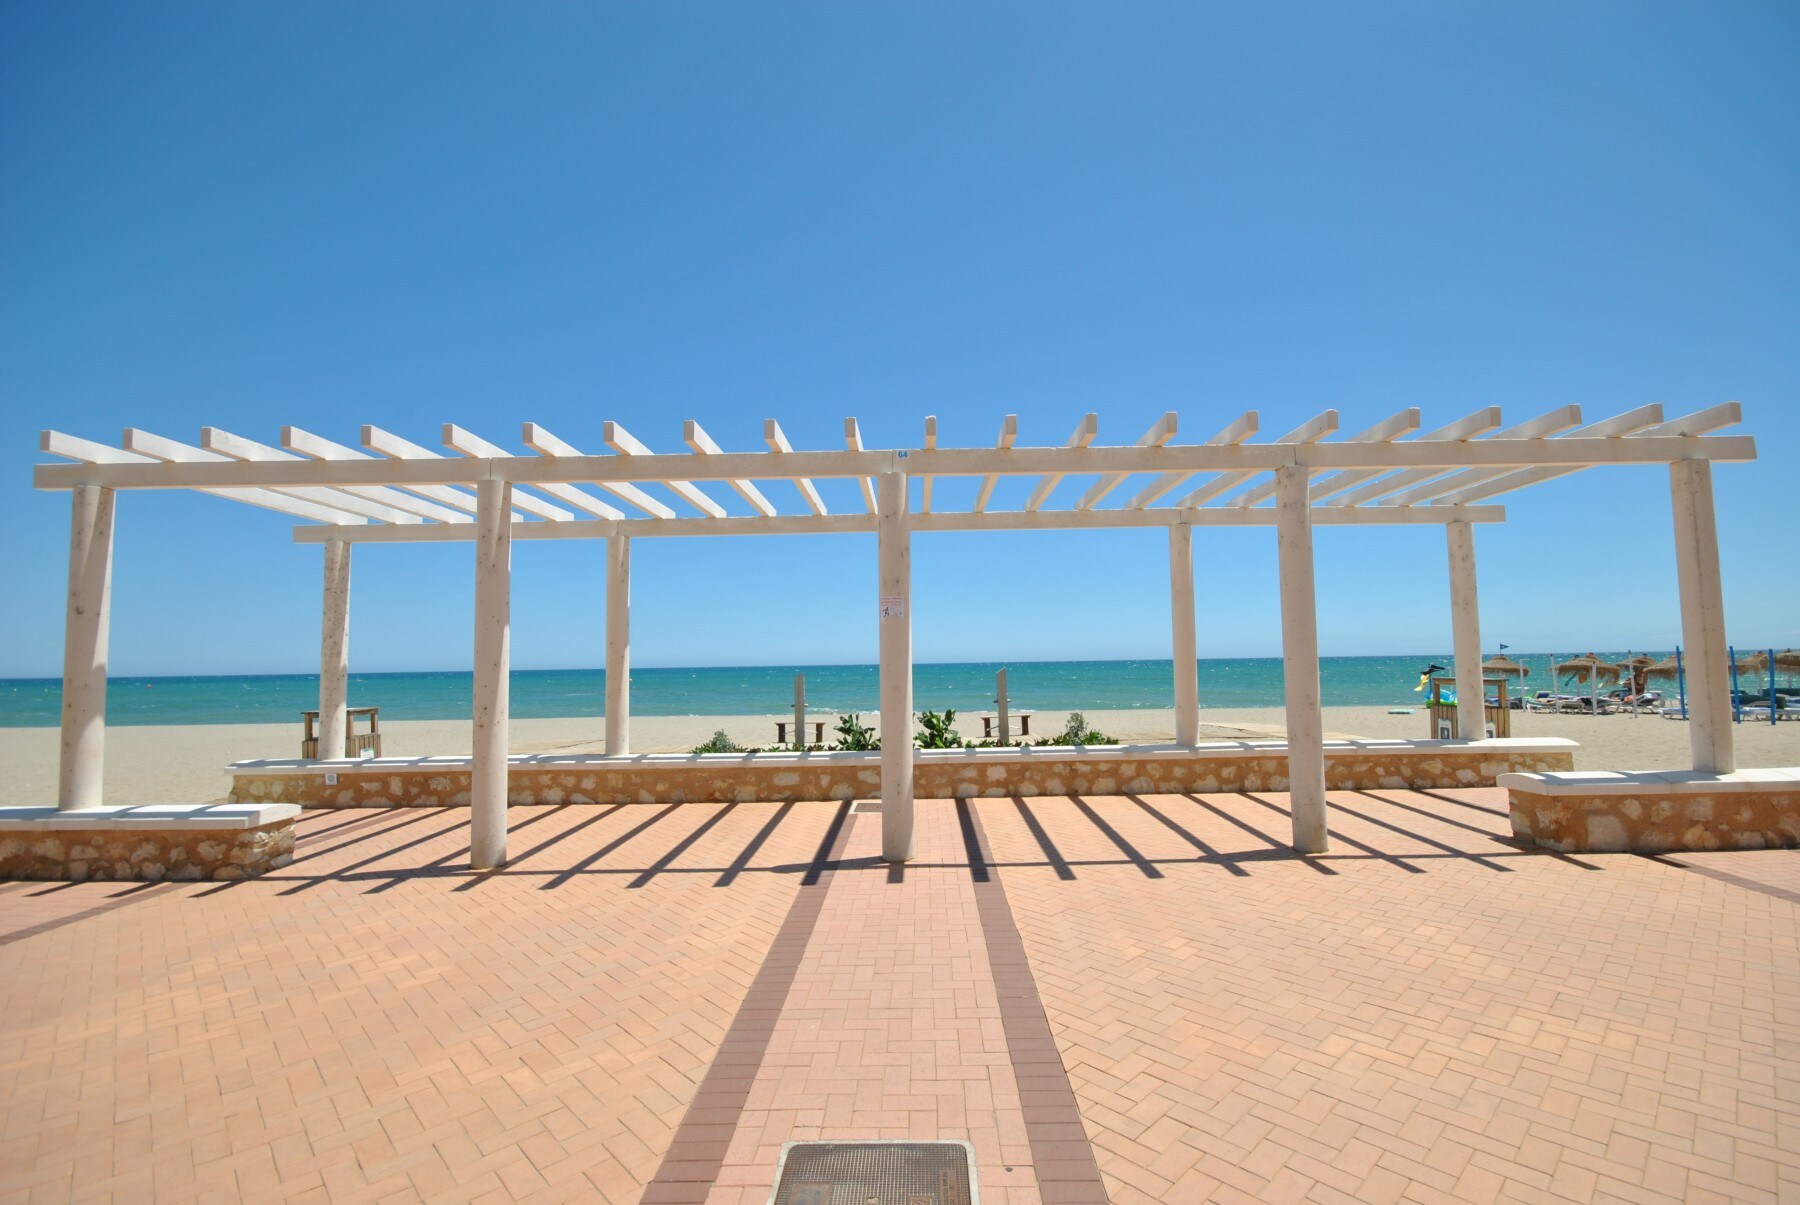 Enjoy the nearby beach of this apartment in Fuengirola